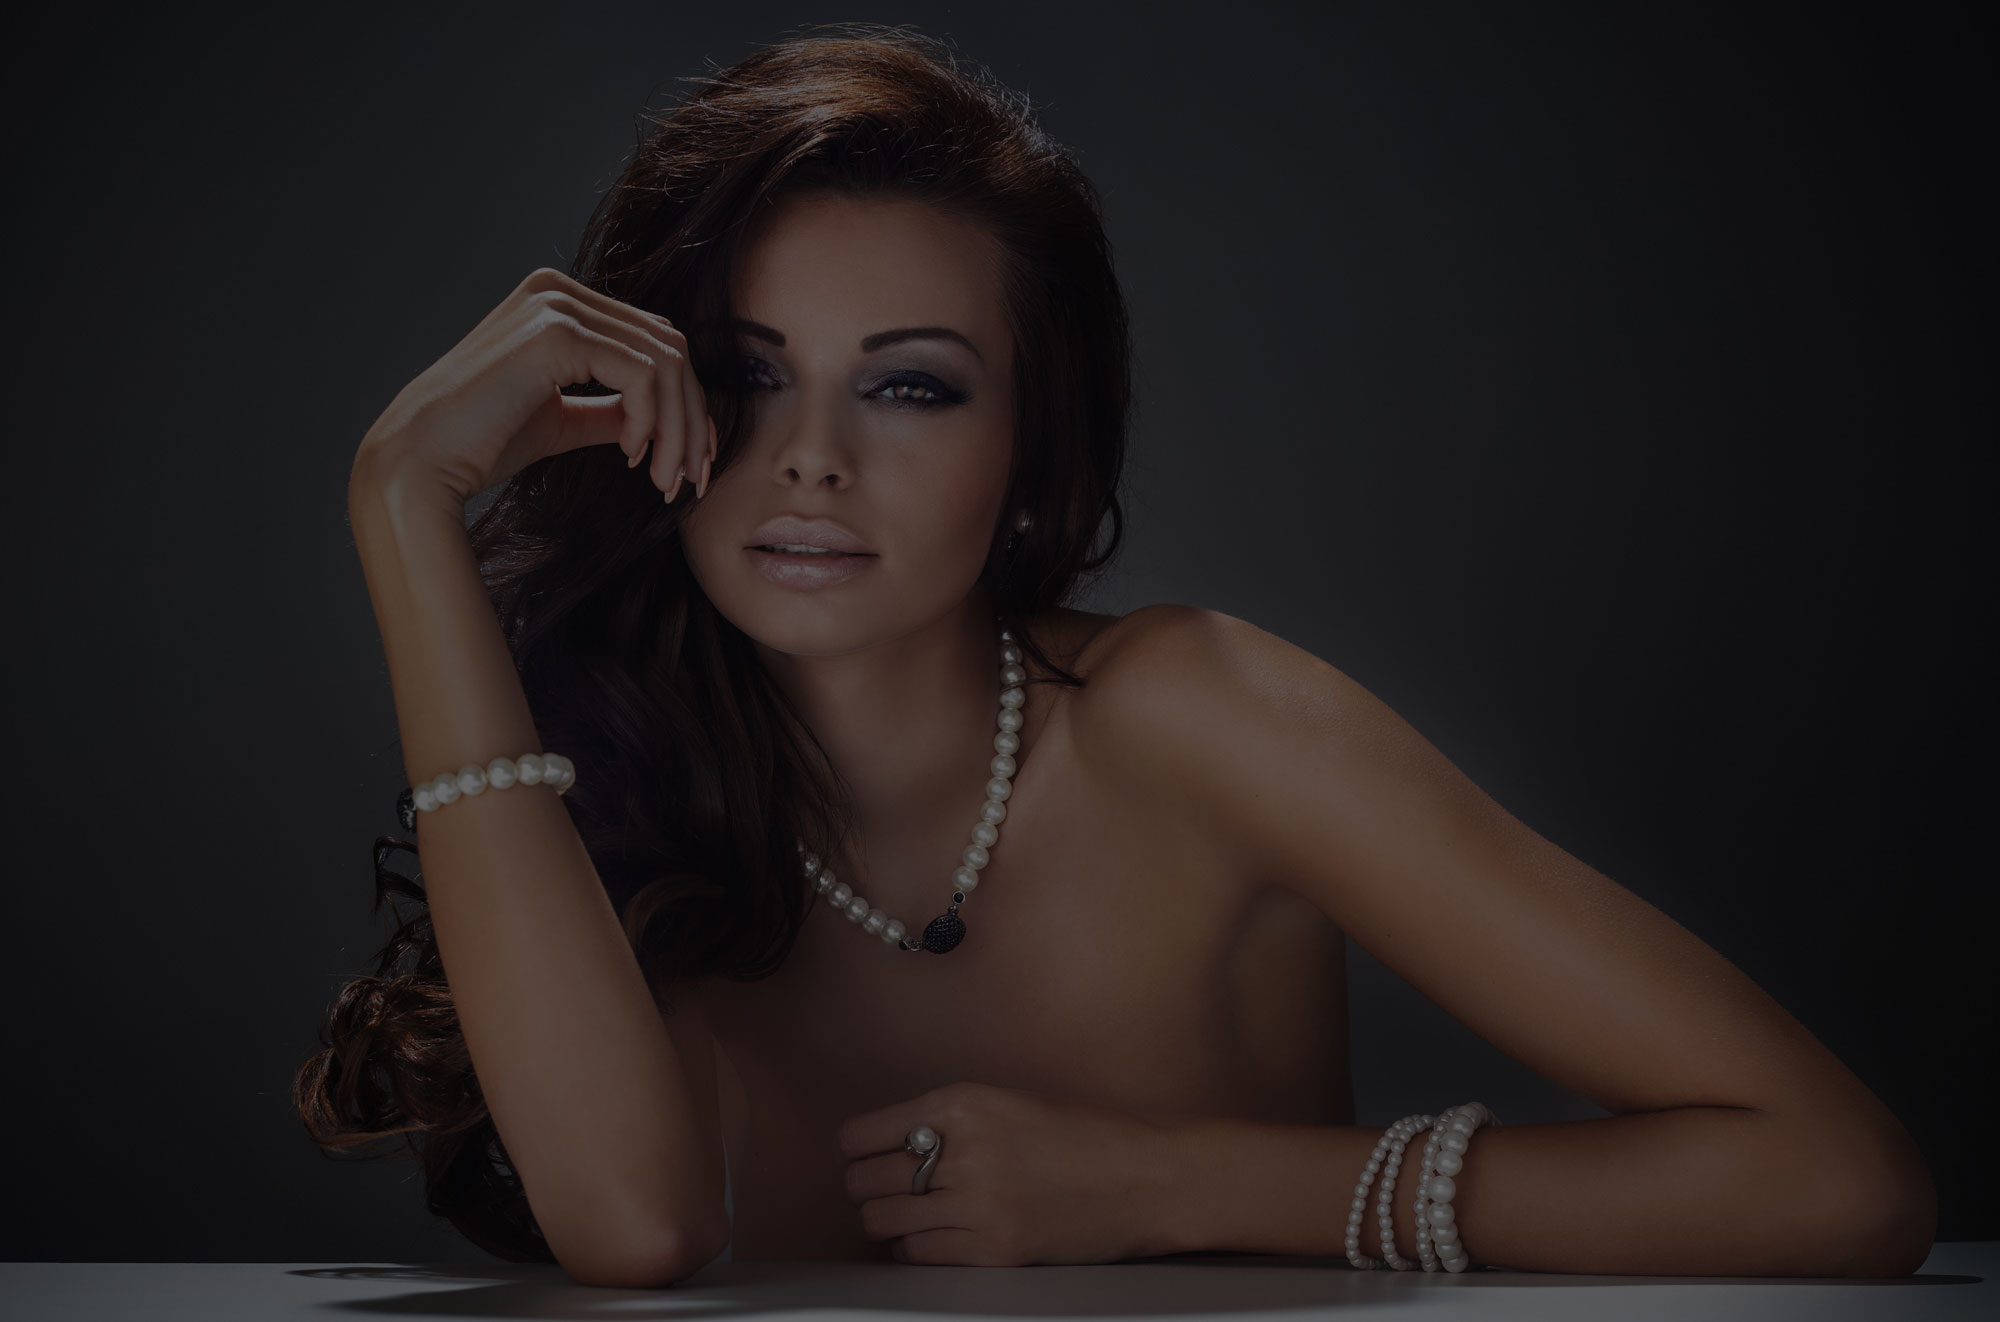 Beautiful woman wearing pearl jewelry resting arms on table showing beautiful arms.